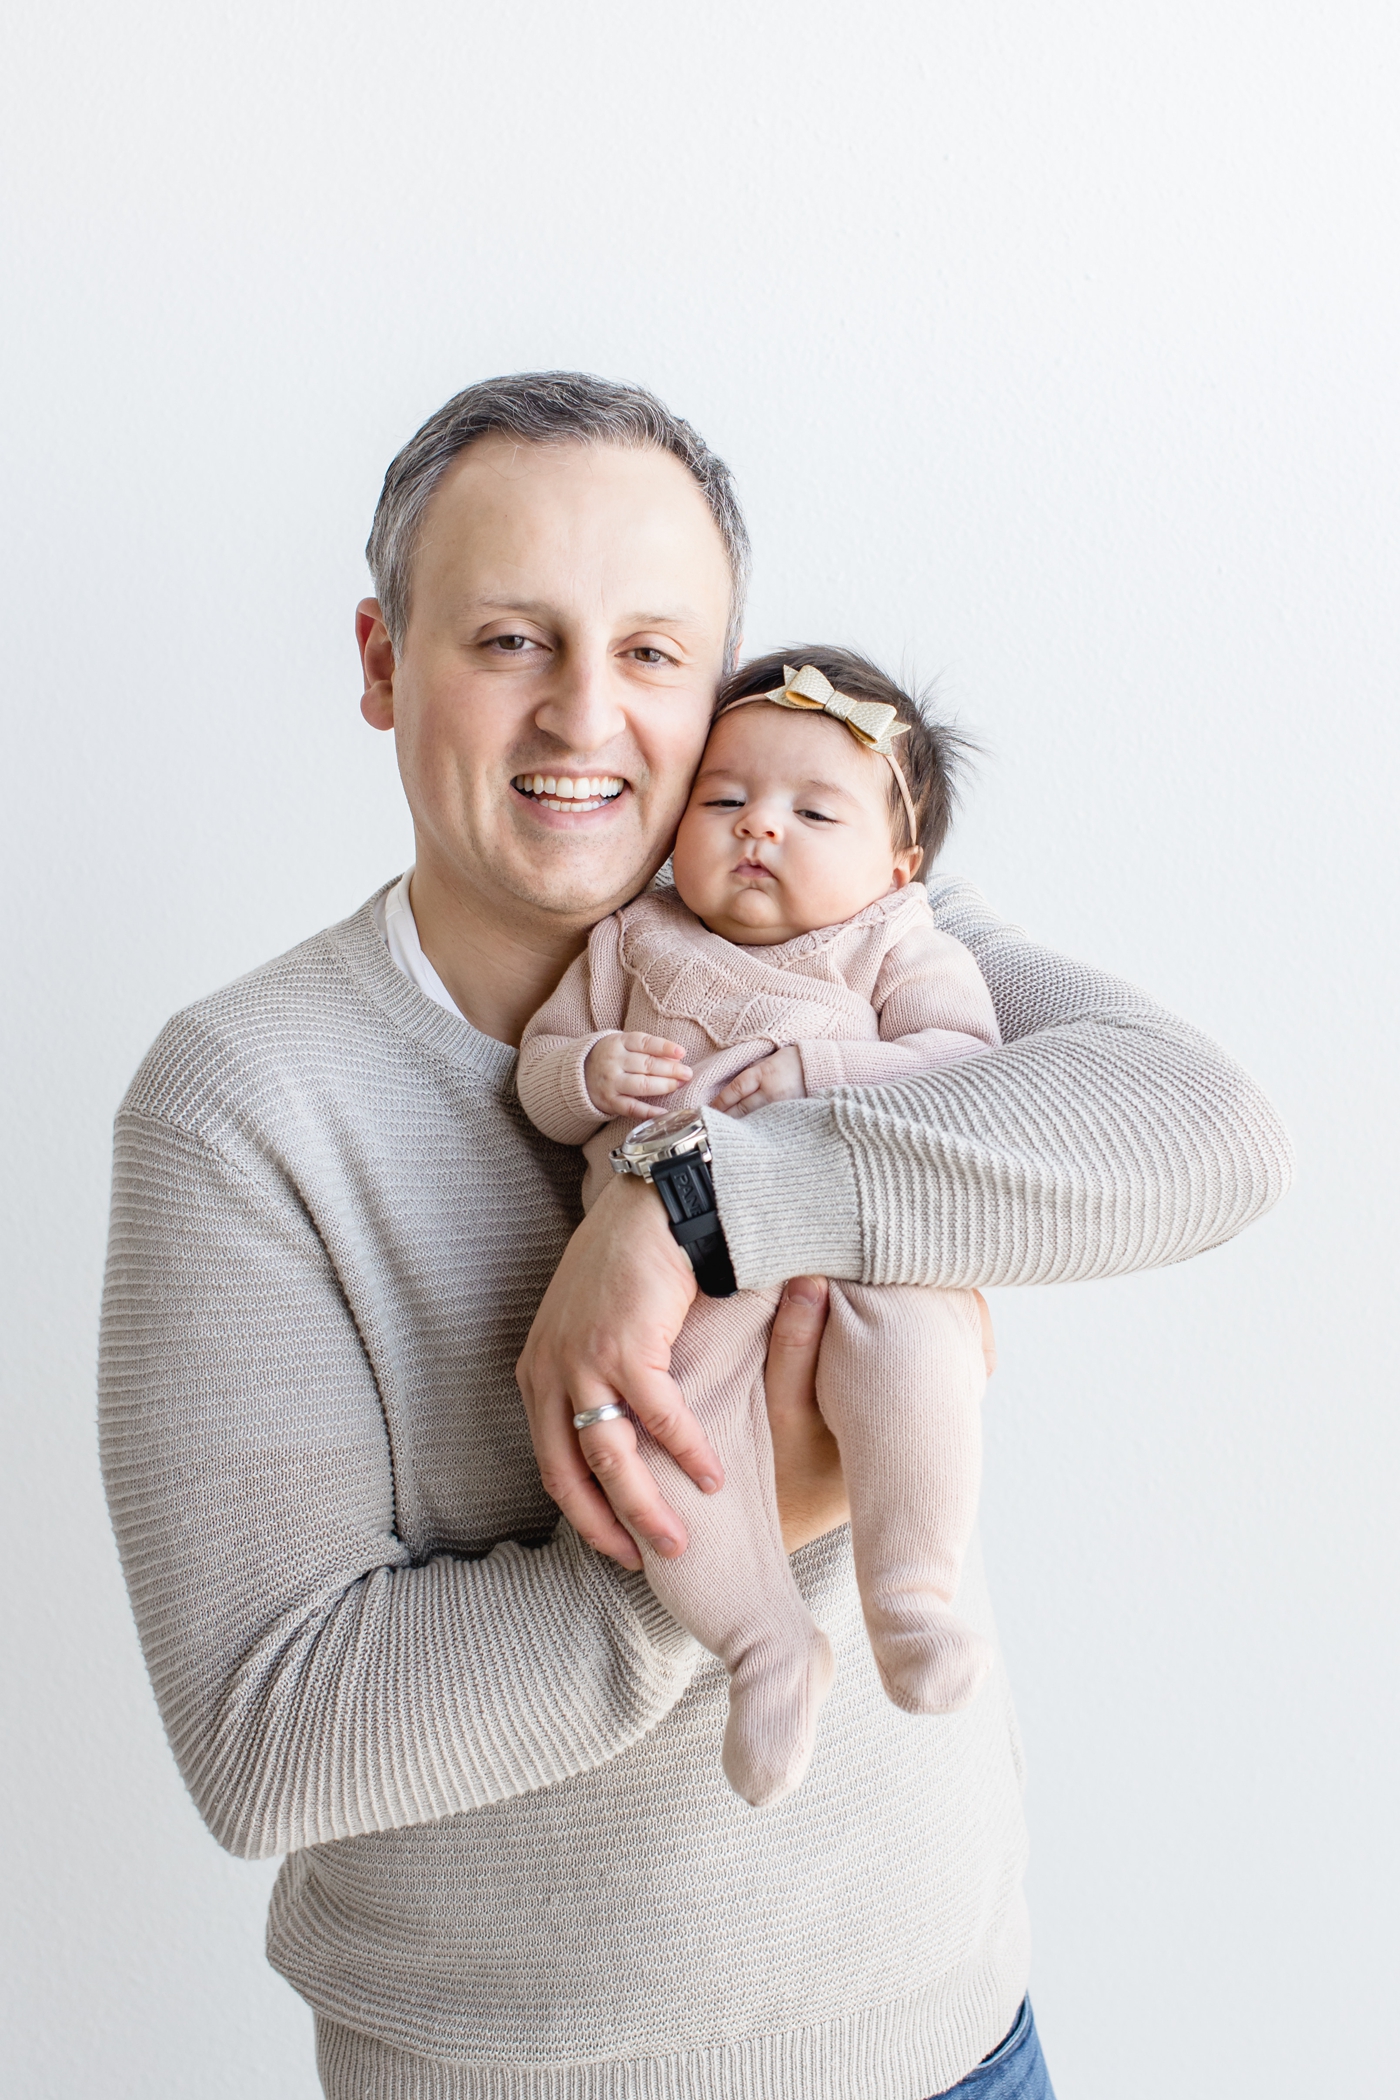 Dad holding baby and smiling during portrait session for three month milestone. Photo by Sana Ahmed Photography.